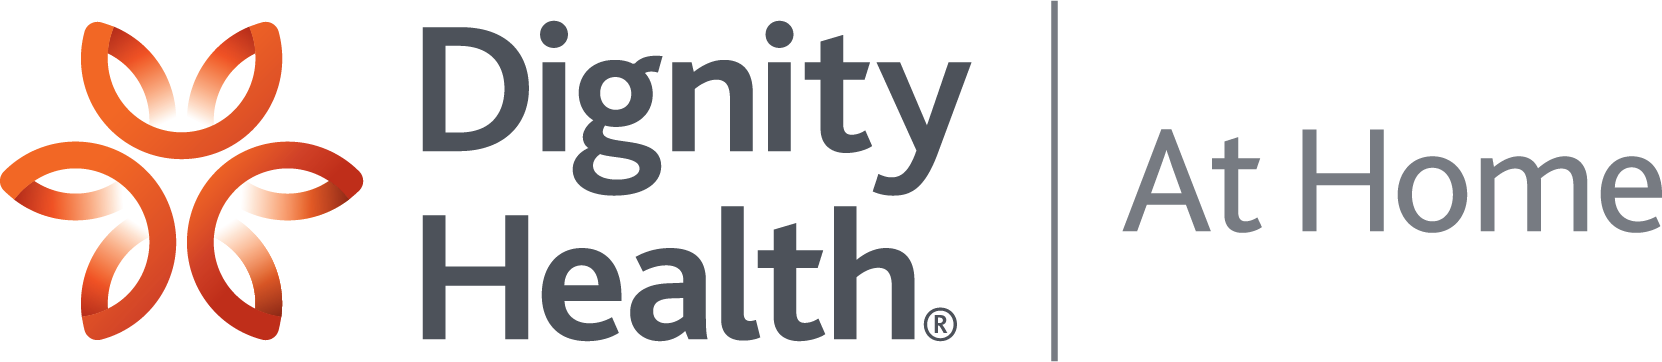 Dignity Health at Home Logo - Go to homepage